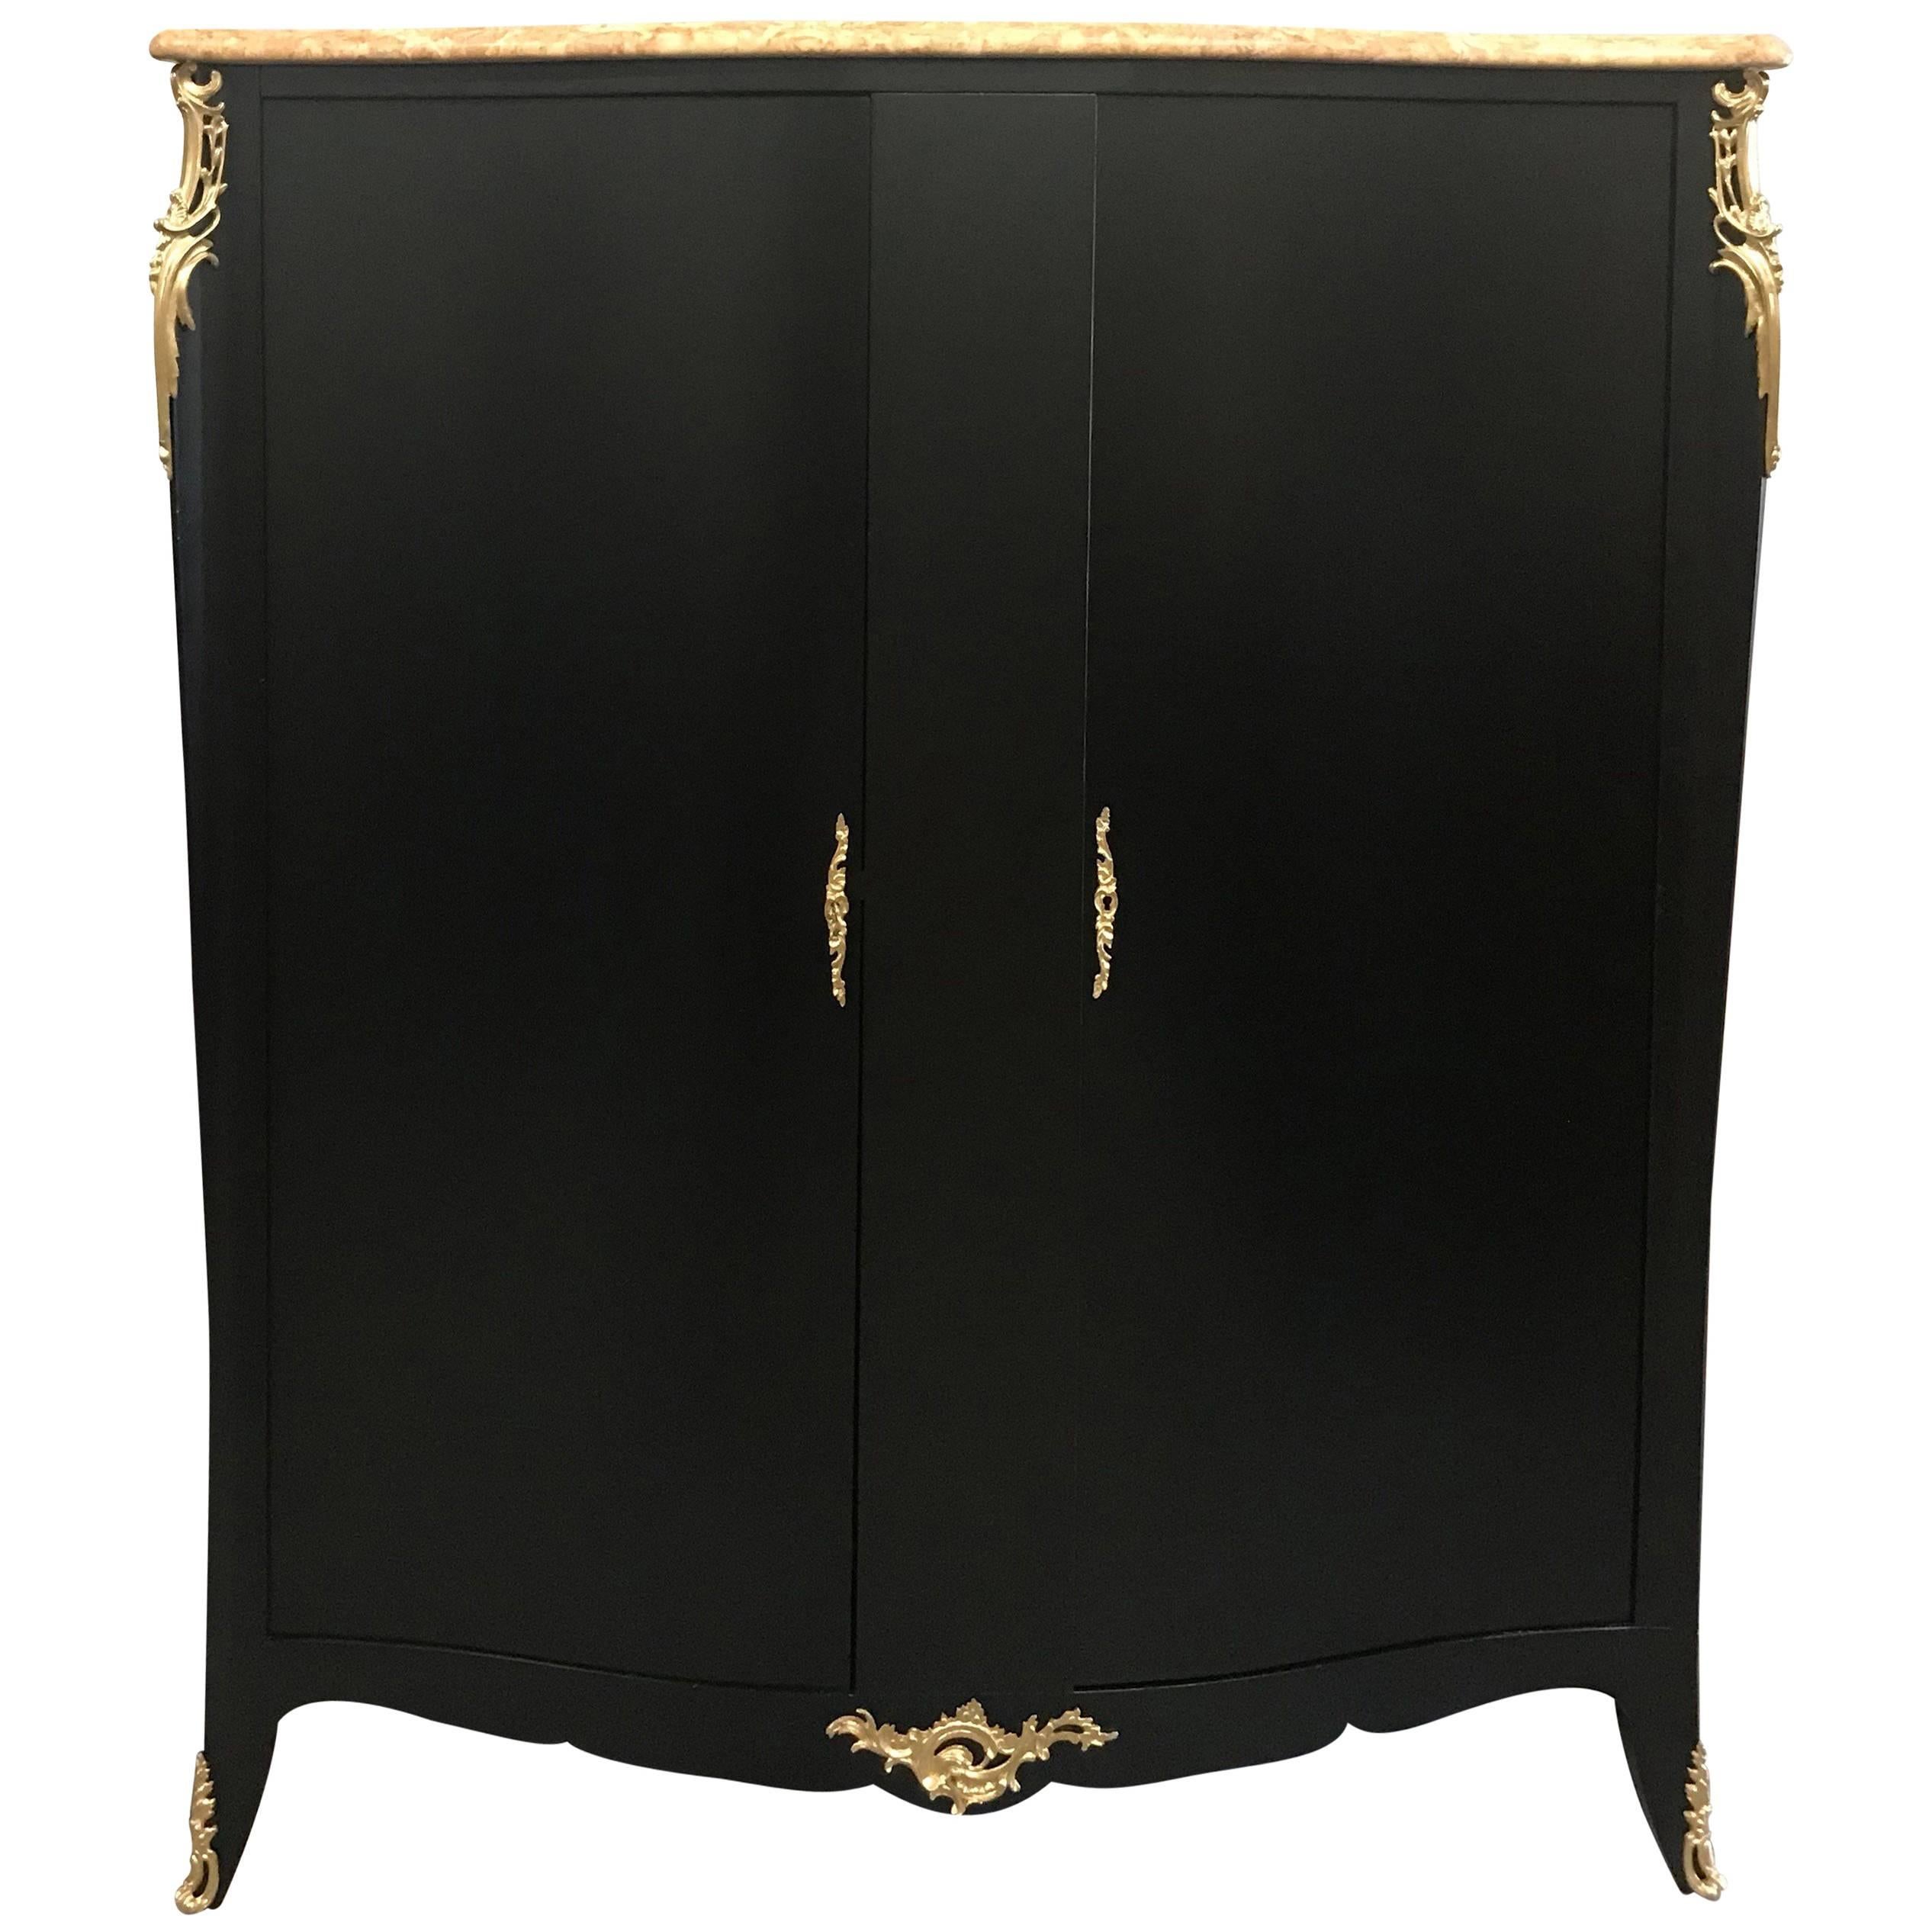 Monumental French Art Deco Ebonized Dry Bar Cabinet with Marble Top, 1940s For Sale